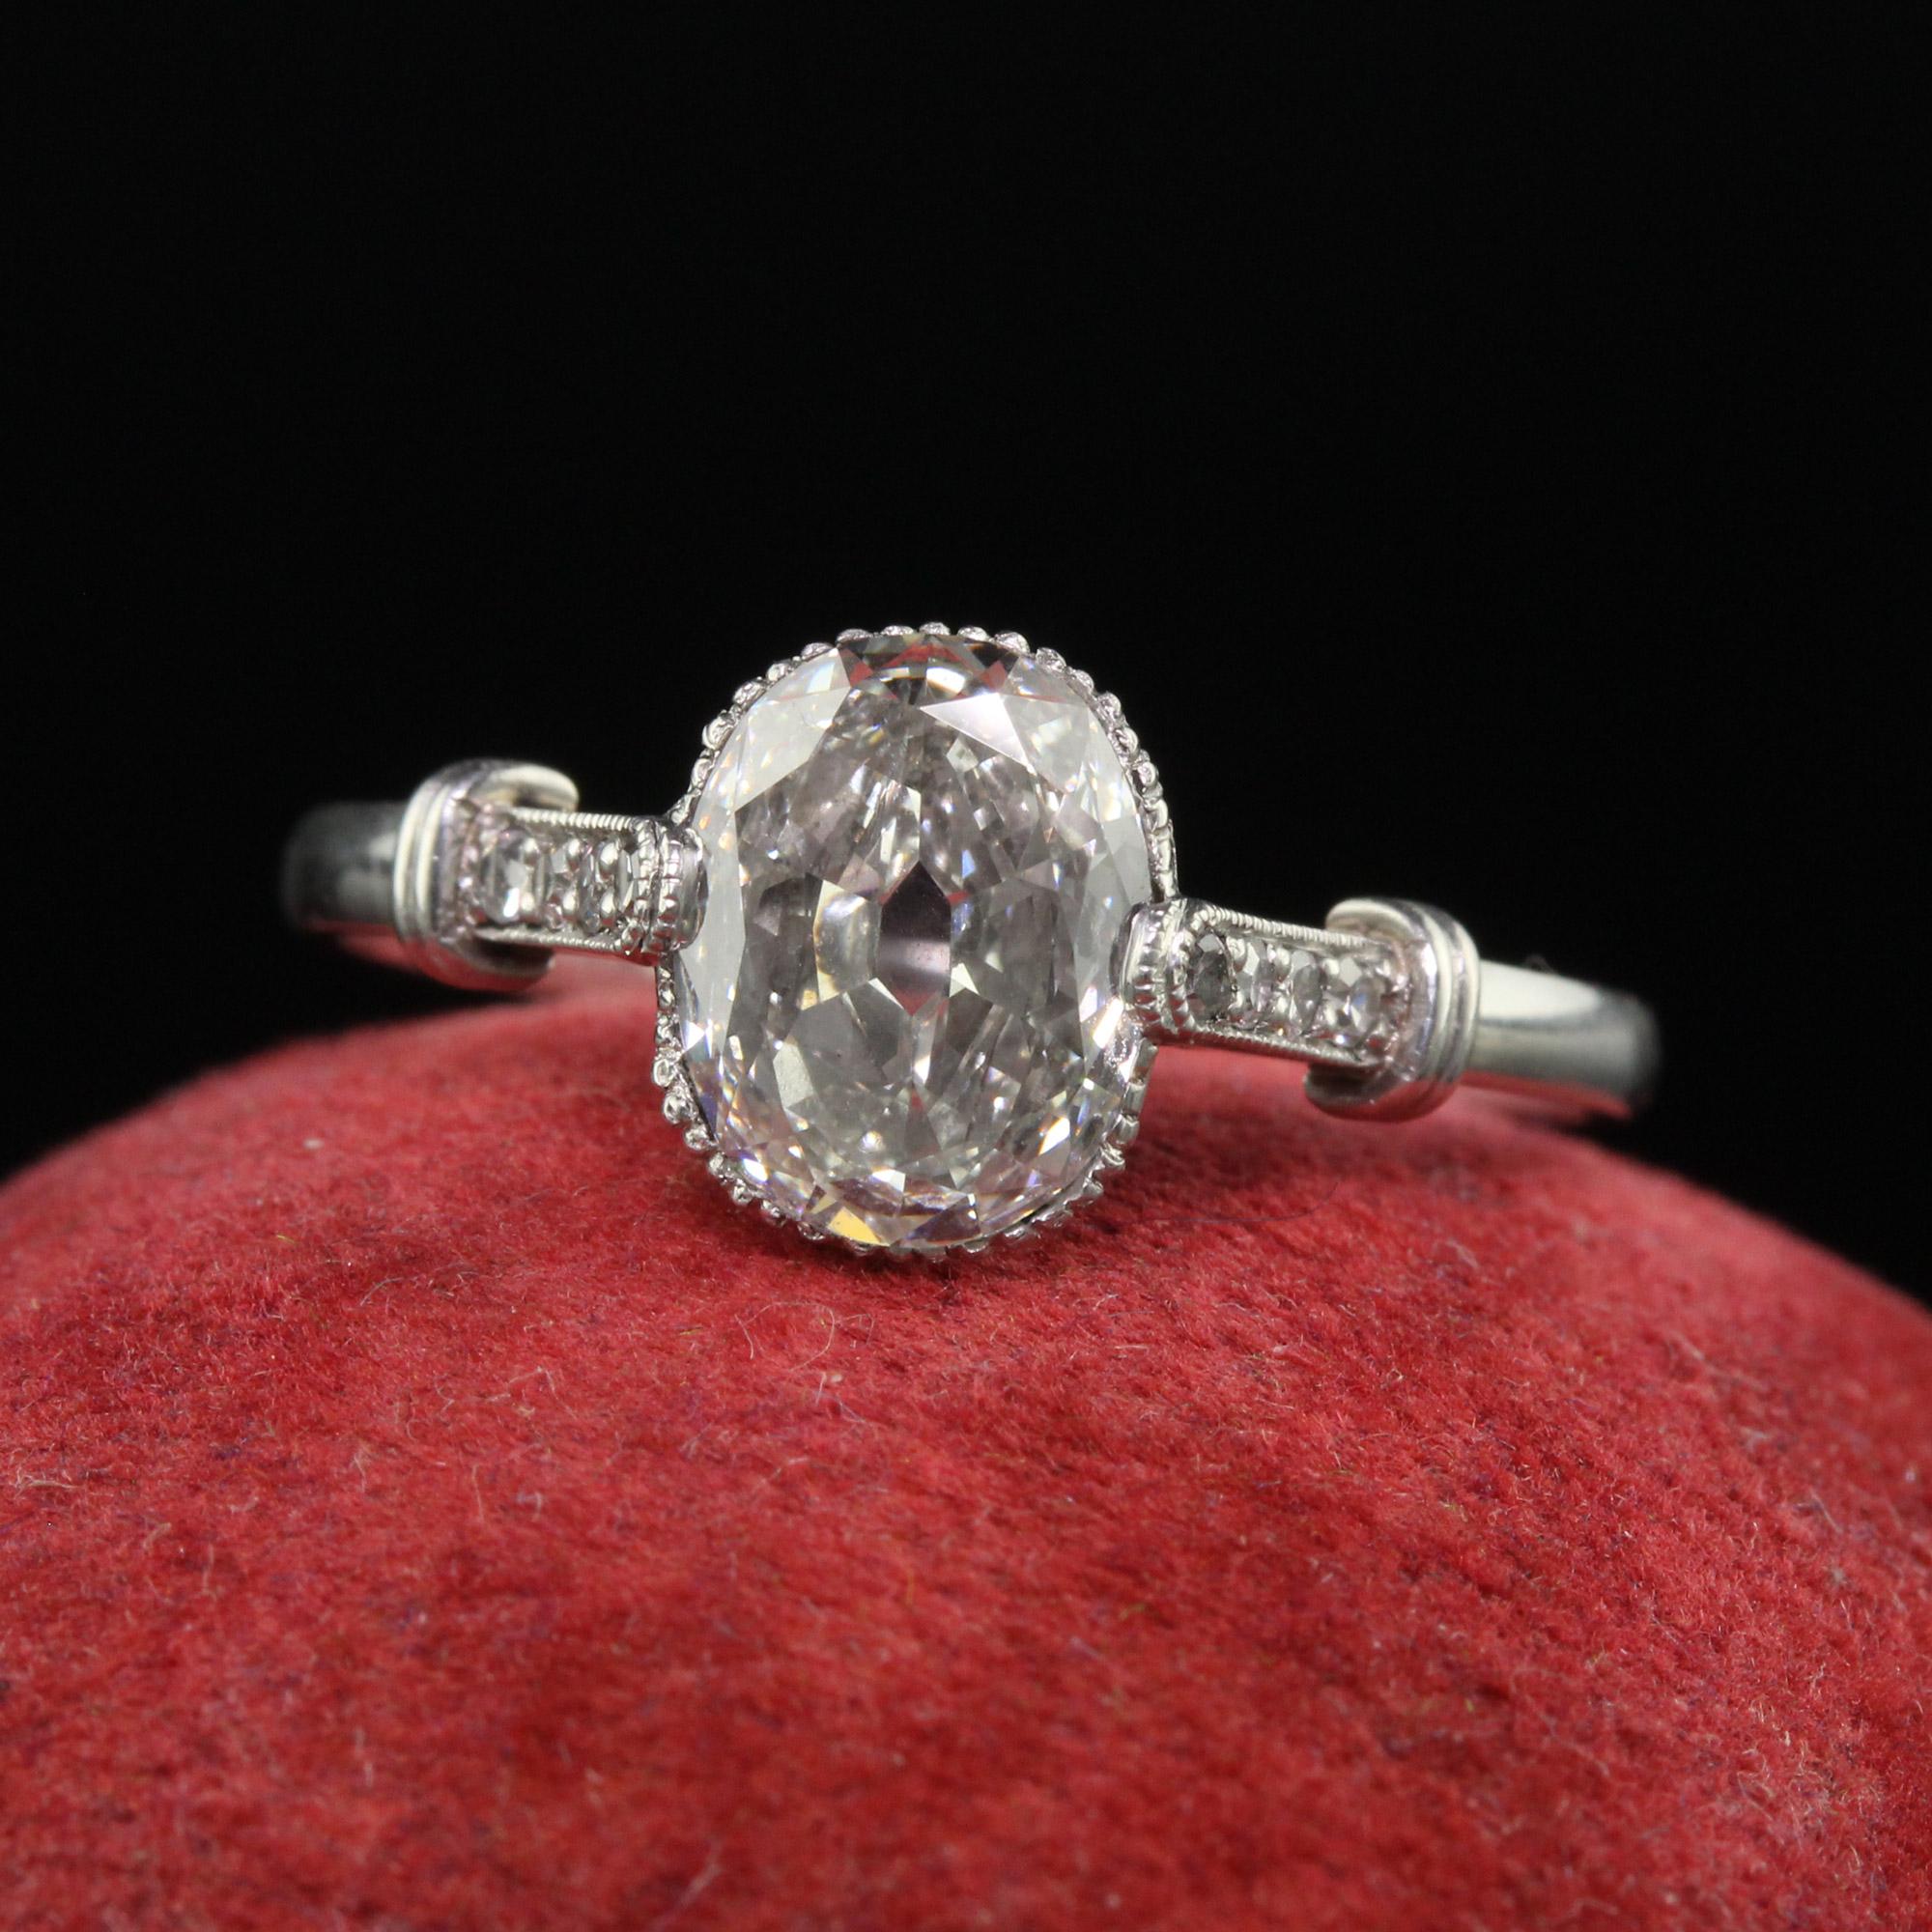 Beautiful Antique Art Deco Platinum Old Oval Cut Diamond Engagement Ring. This gorgeous antique engagement ring is crafted in platinum. The center holds a beautiful old cut oval diamond that is very charming. It is set in a gorgeous filigree art